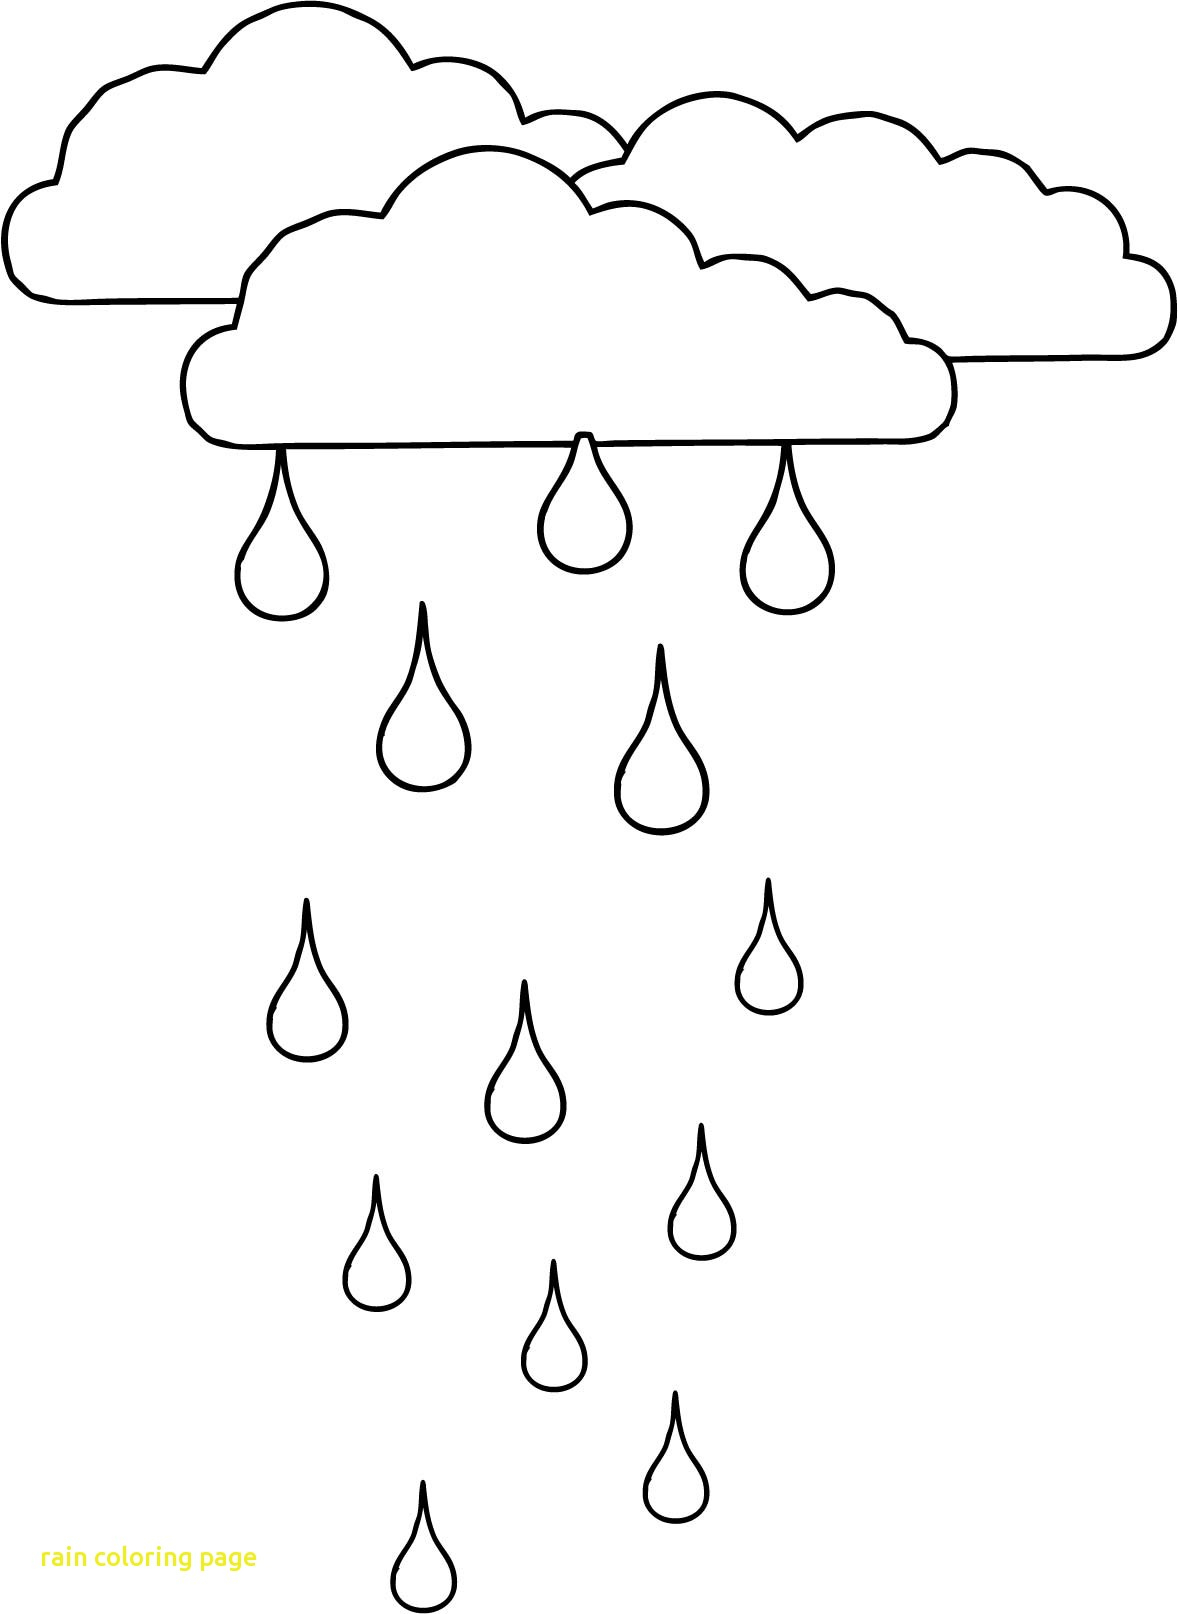 Raindrop Coloring Pages Cloudsrain Coloring Page Raindrop Pages Adult Rain Best Free